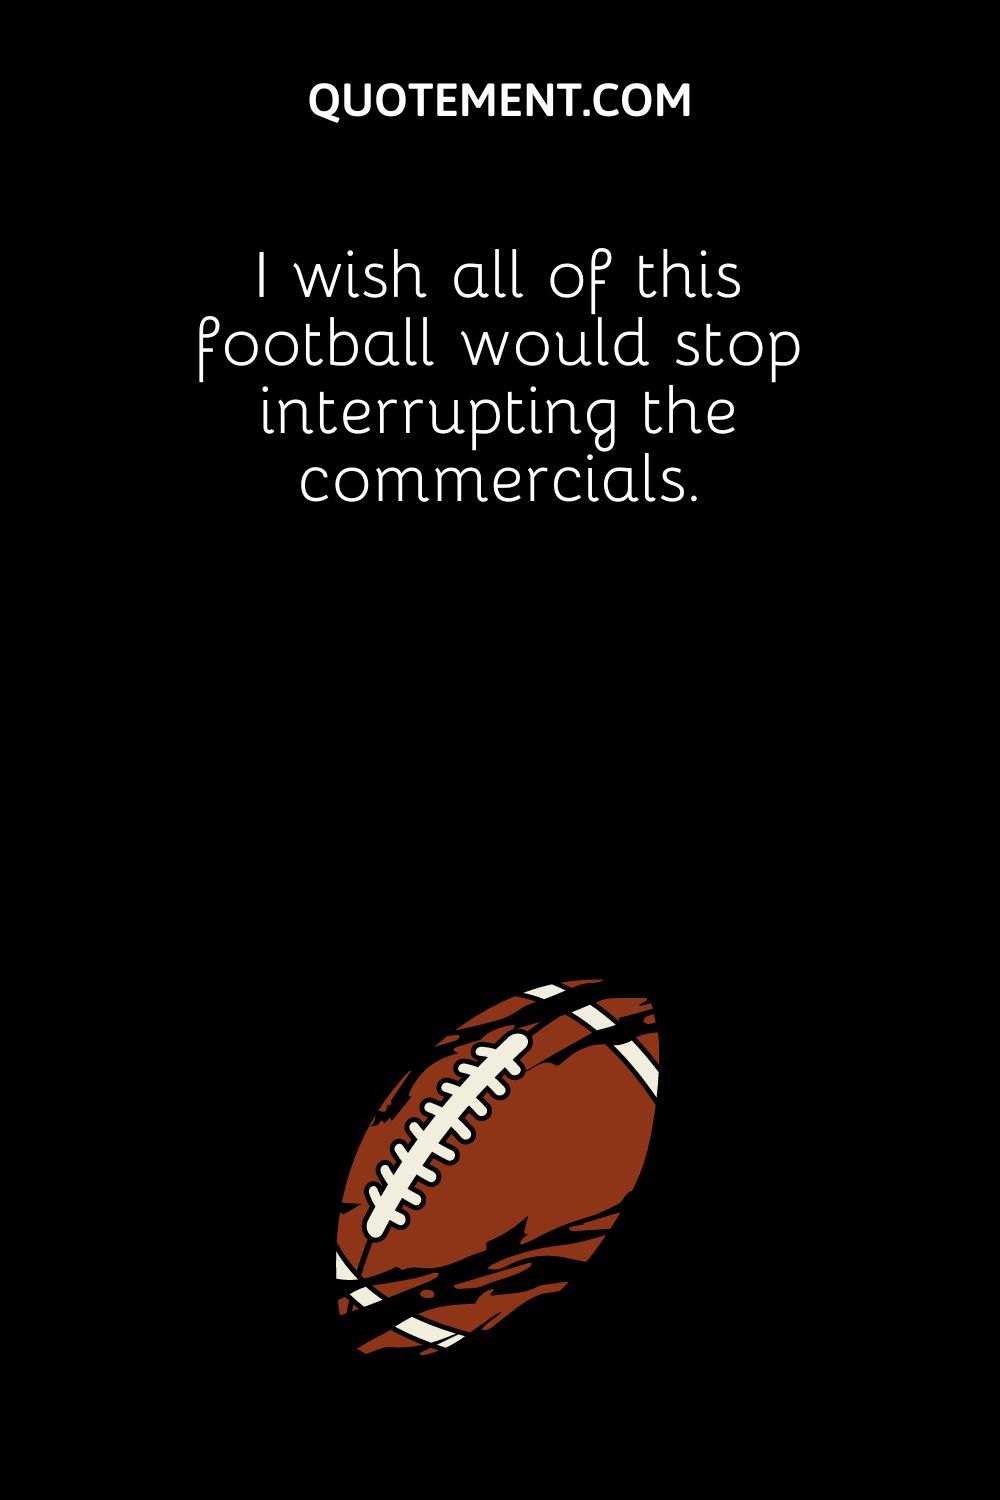 I wish all of this football would stop interrupting the commercials